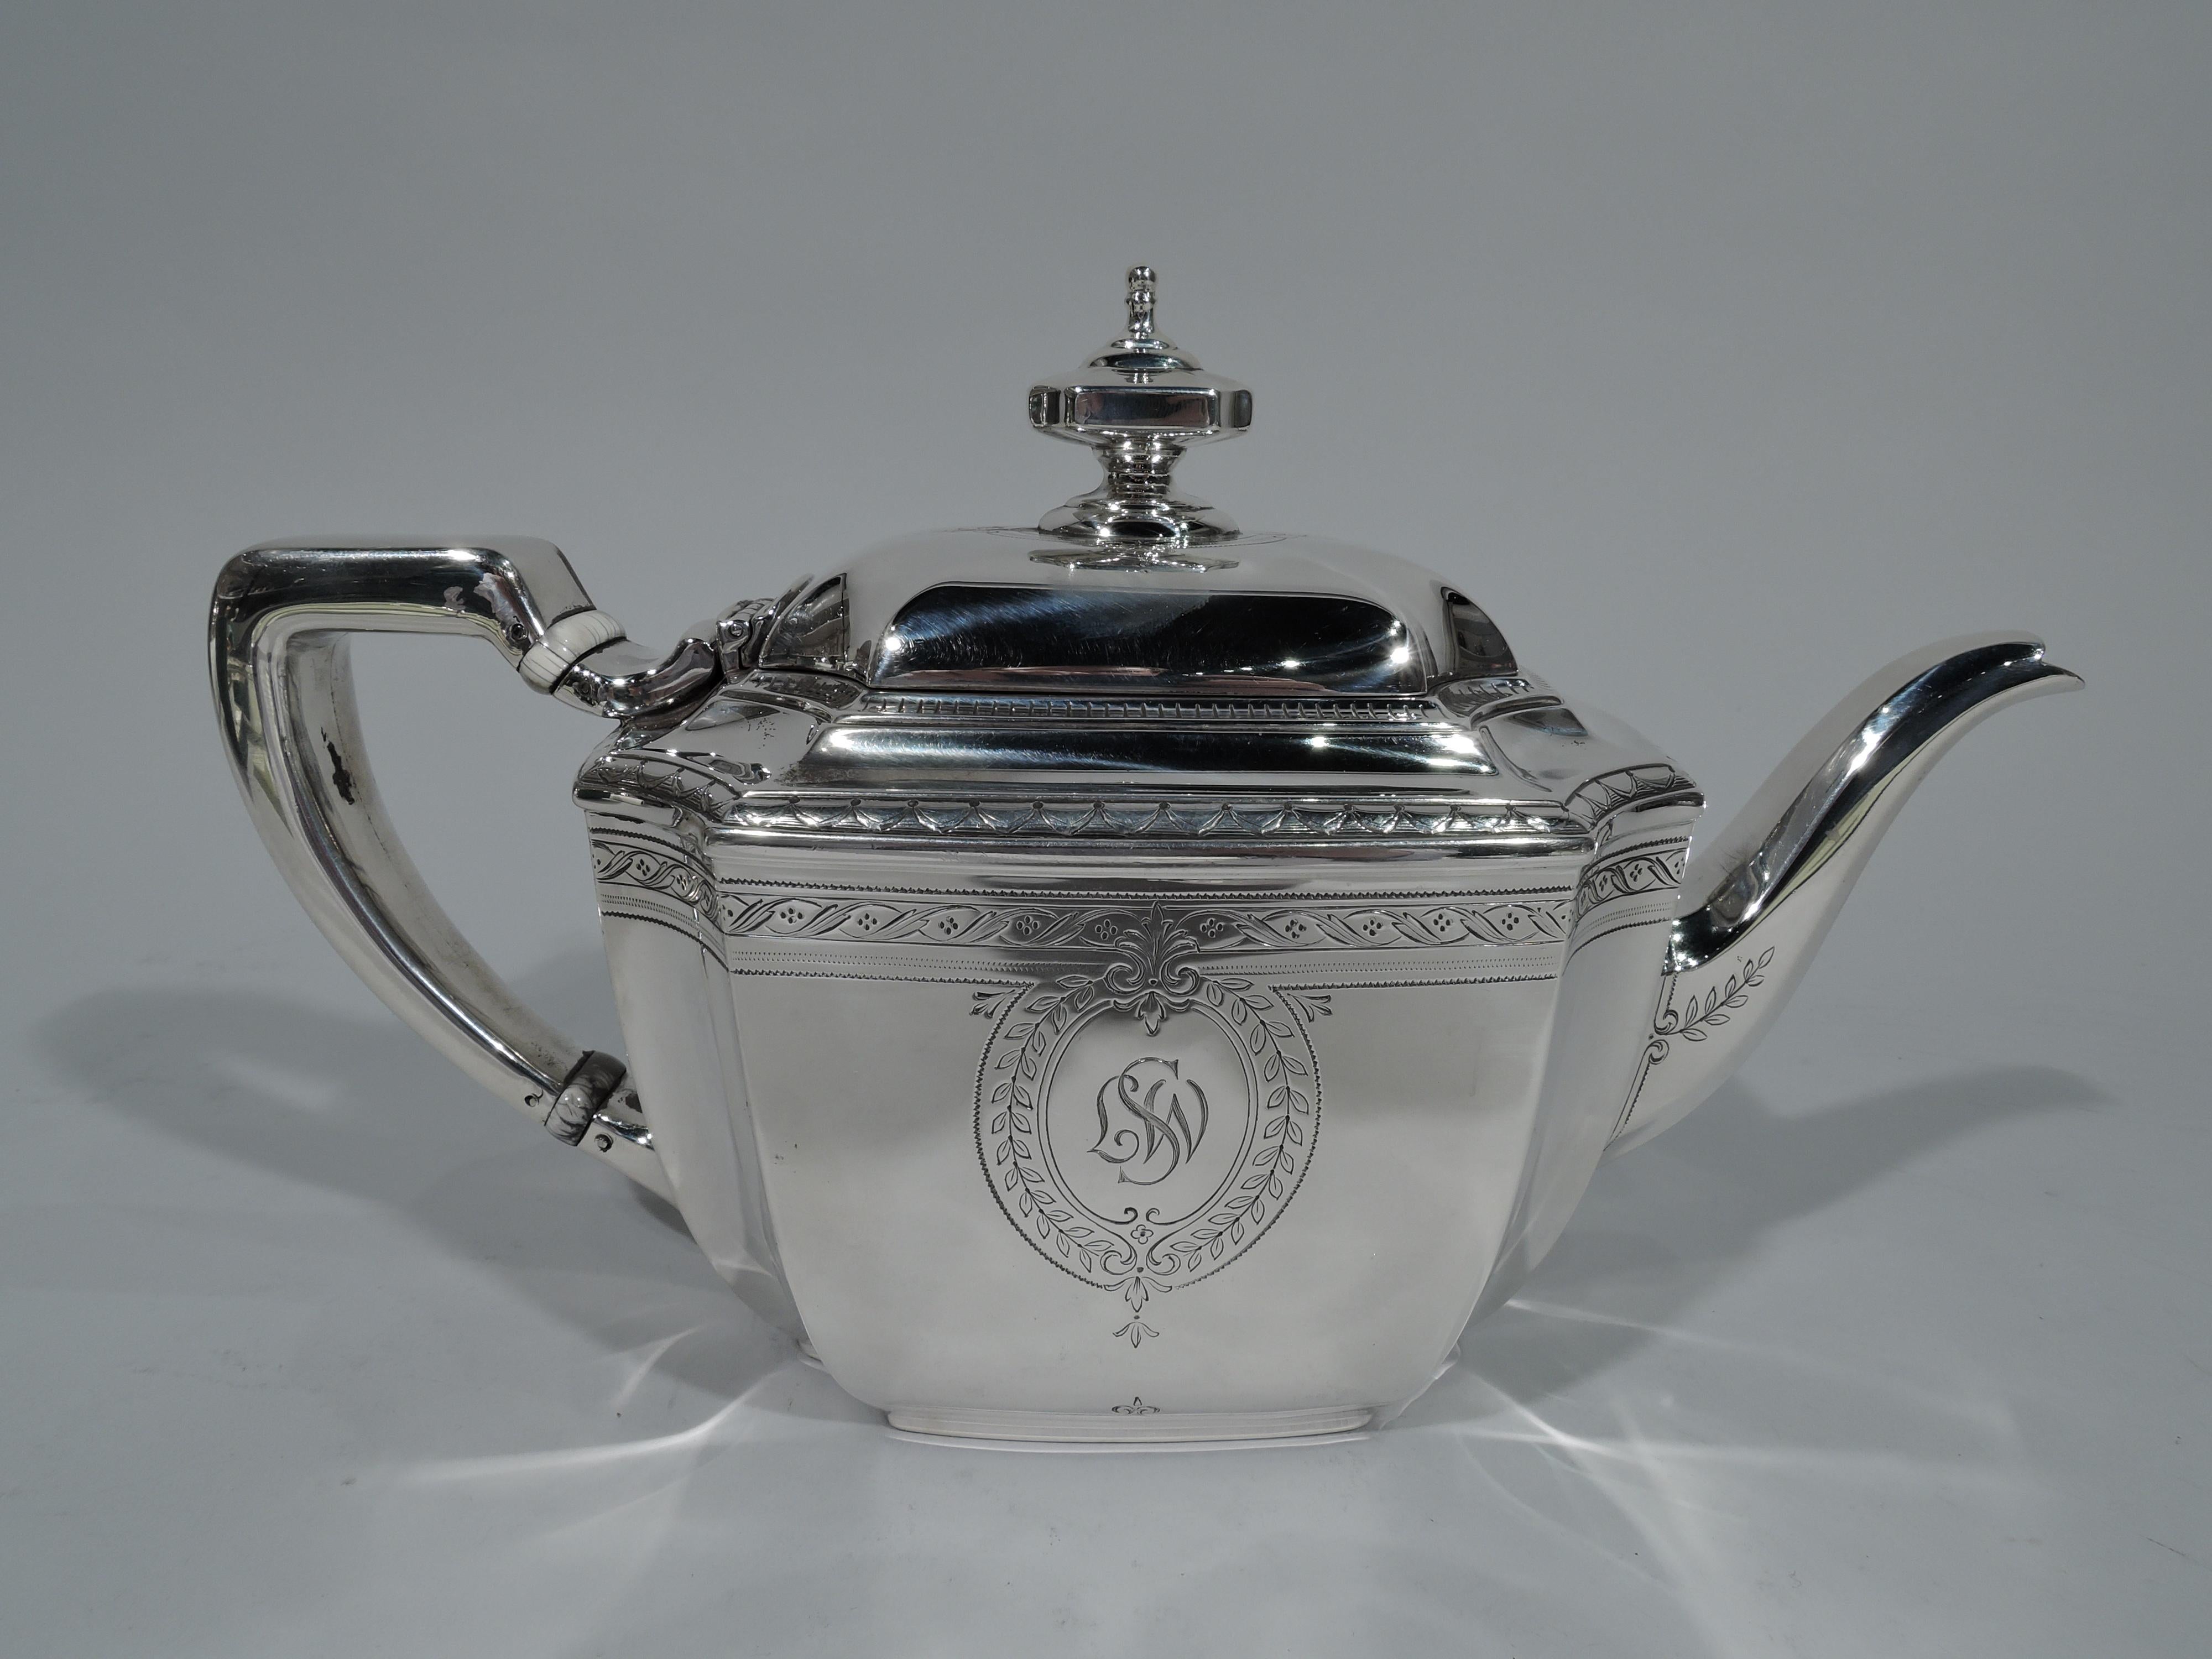 Classic sterling silver teapot in engraved Hampton pattern. Made by Tiffany & Co. in New York, ca 1912. Rectilinear with tapering sides, concave corners, and stepped rim. Cover hinged and raised with vase finial. Scroll bracket-handle and faceted